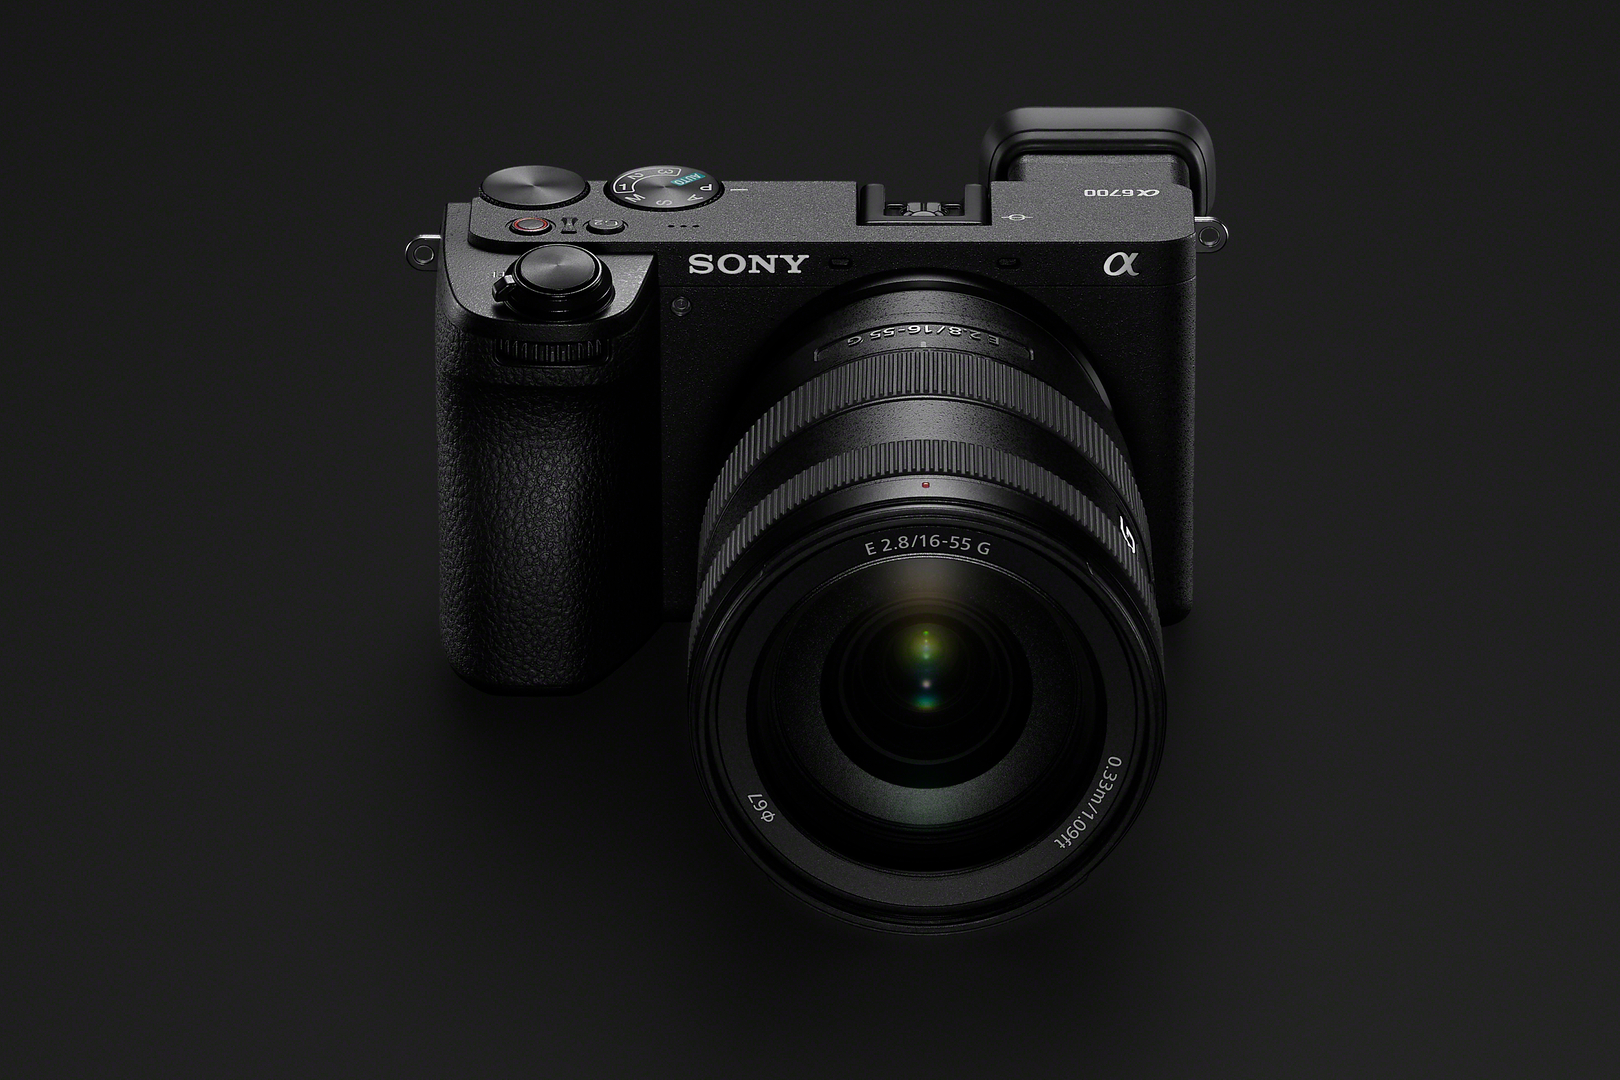 Sony A6700 APS-C mirrorless camera arrives to challenge Fujifilm X-S20 for  best value video creator camera -  News